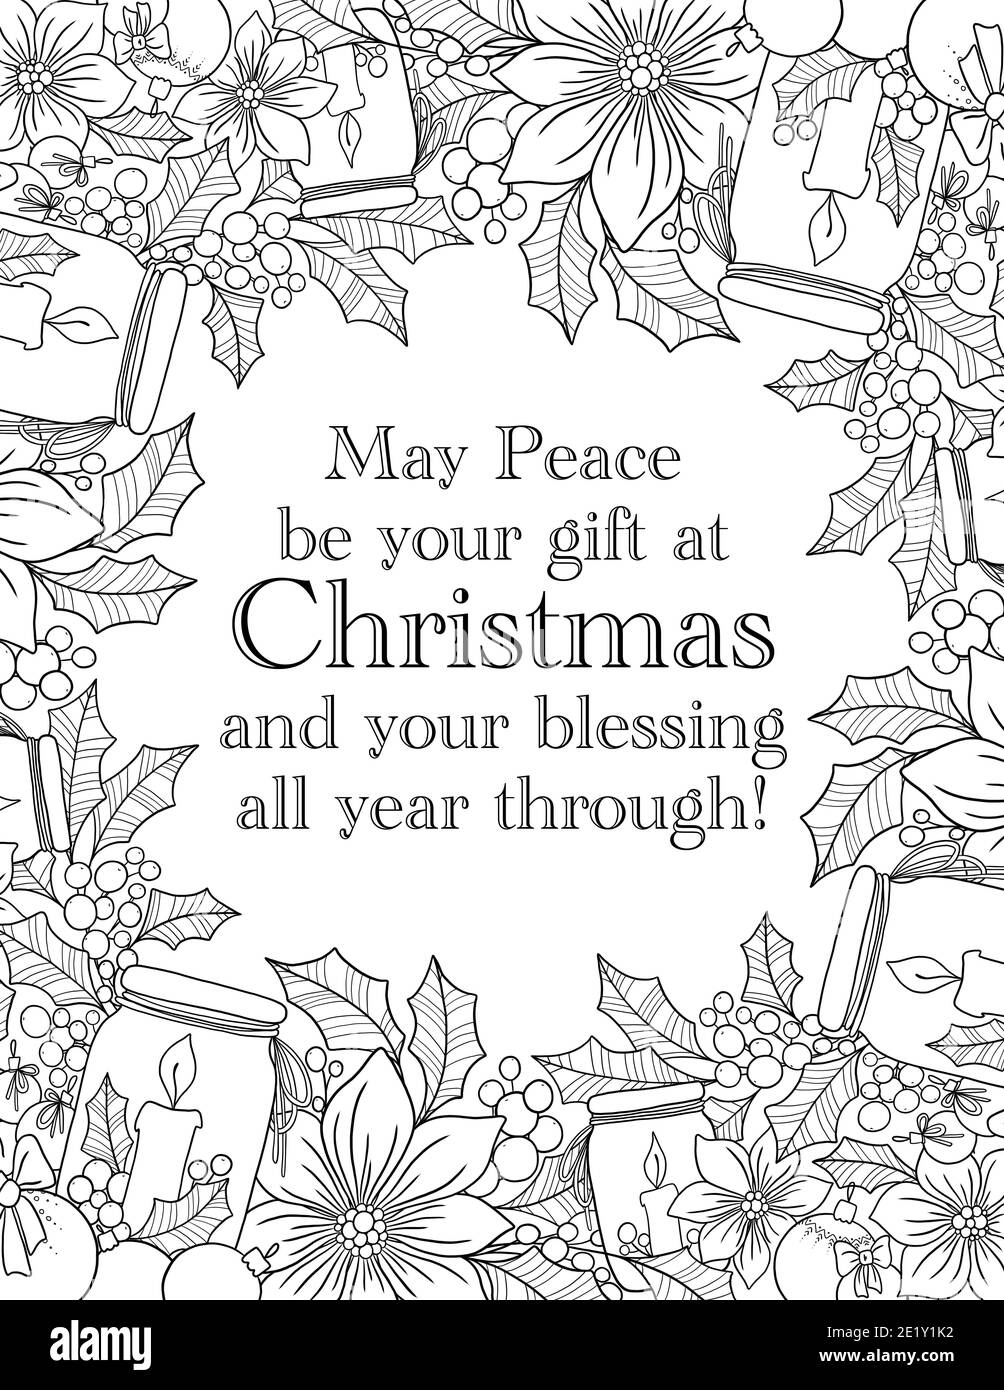 Christmas adult coloring book page with greeting words. Winter Holidays greeting card. Stress relief coloring page. Stock Photo